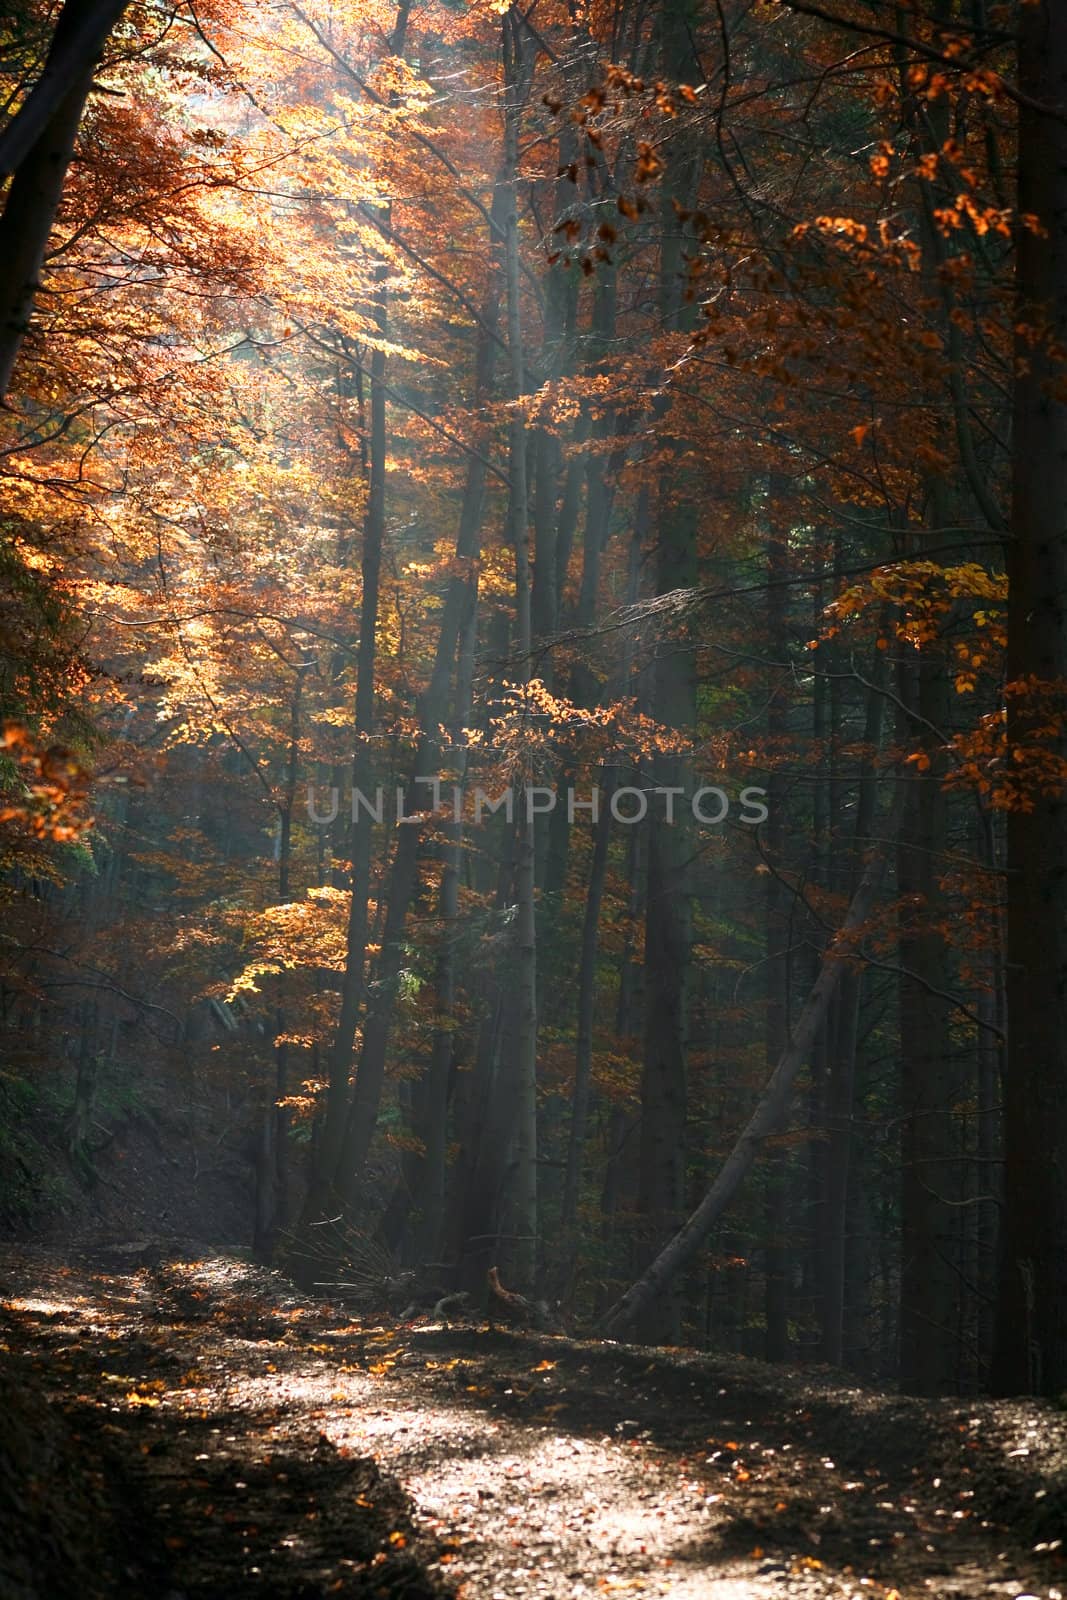 Autumn in a forest by velkol